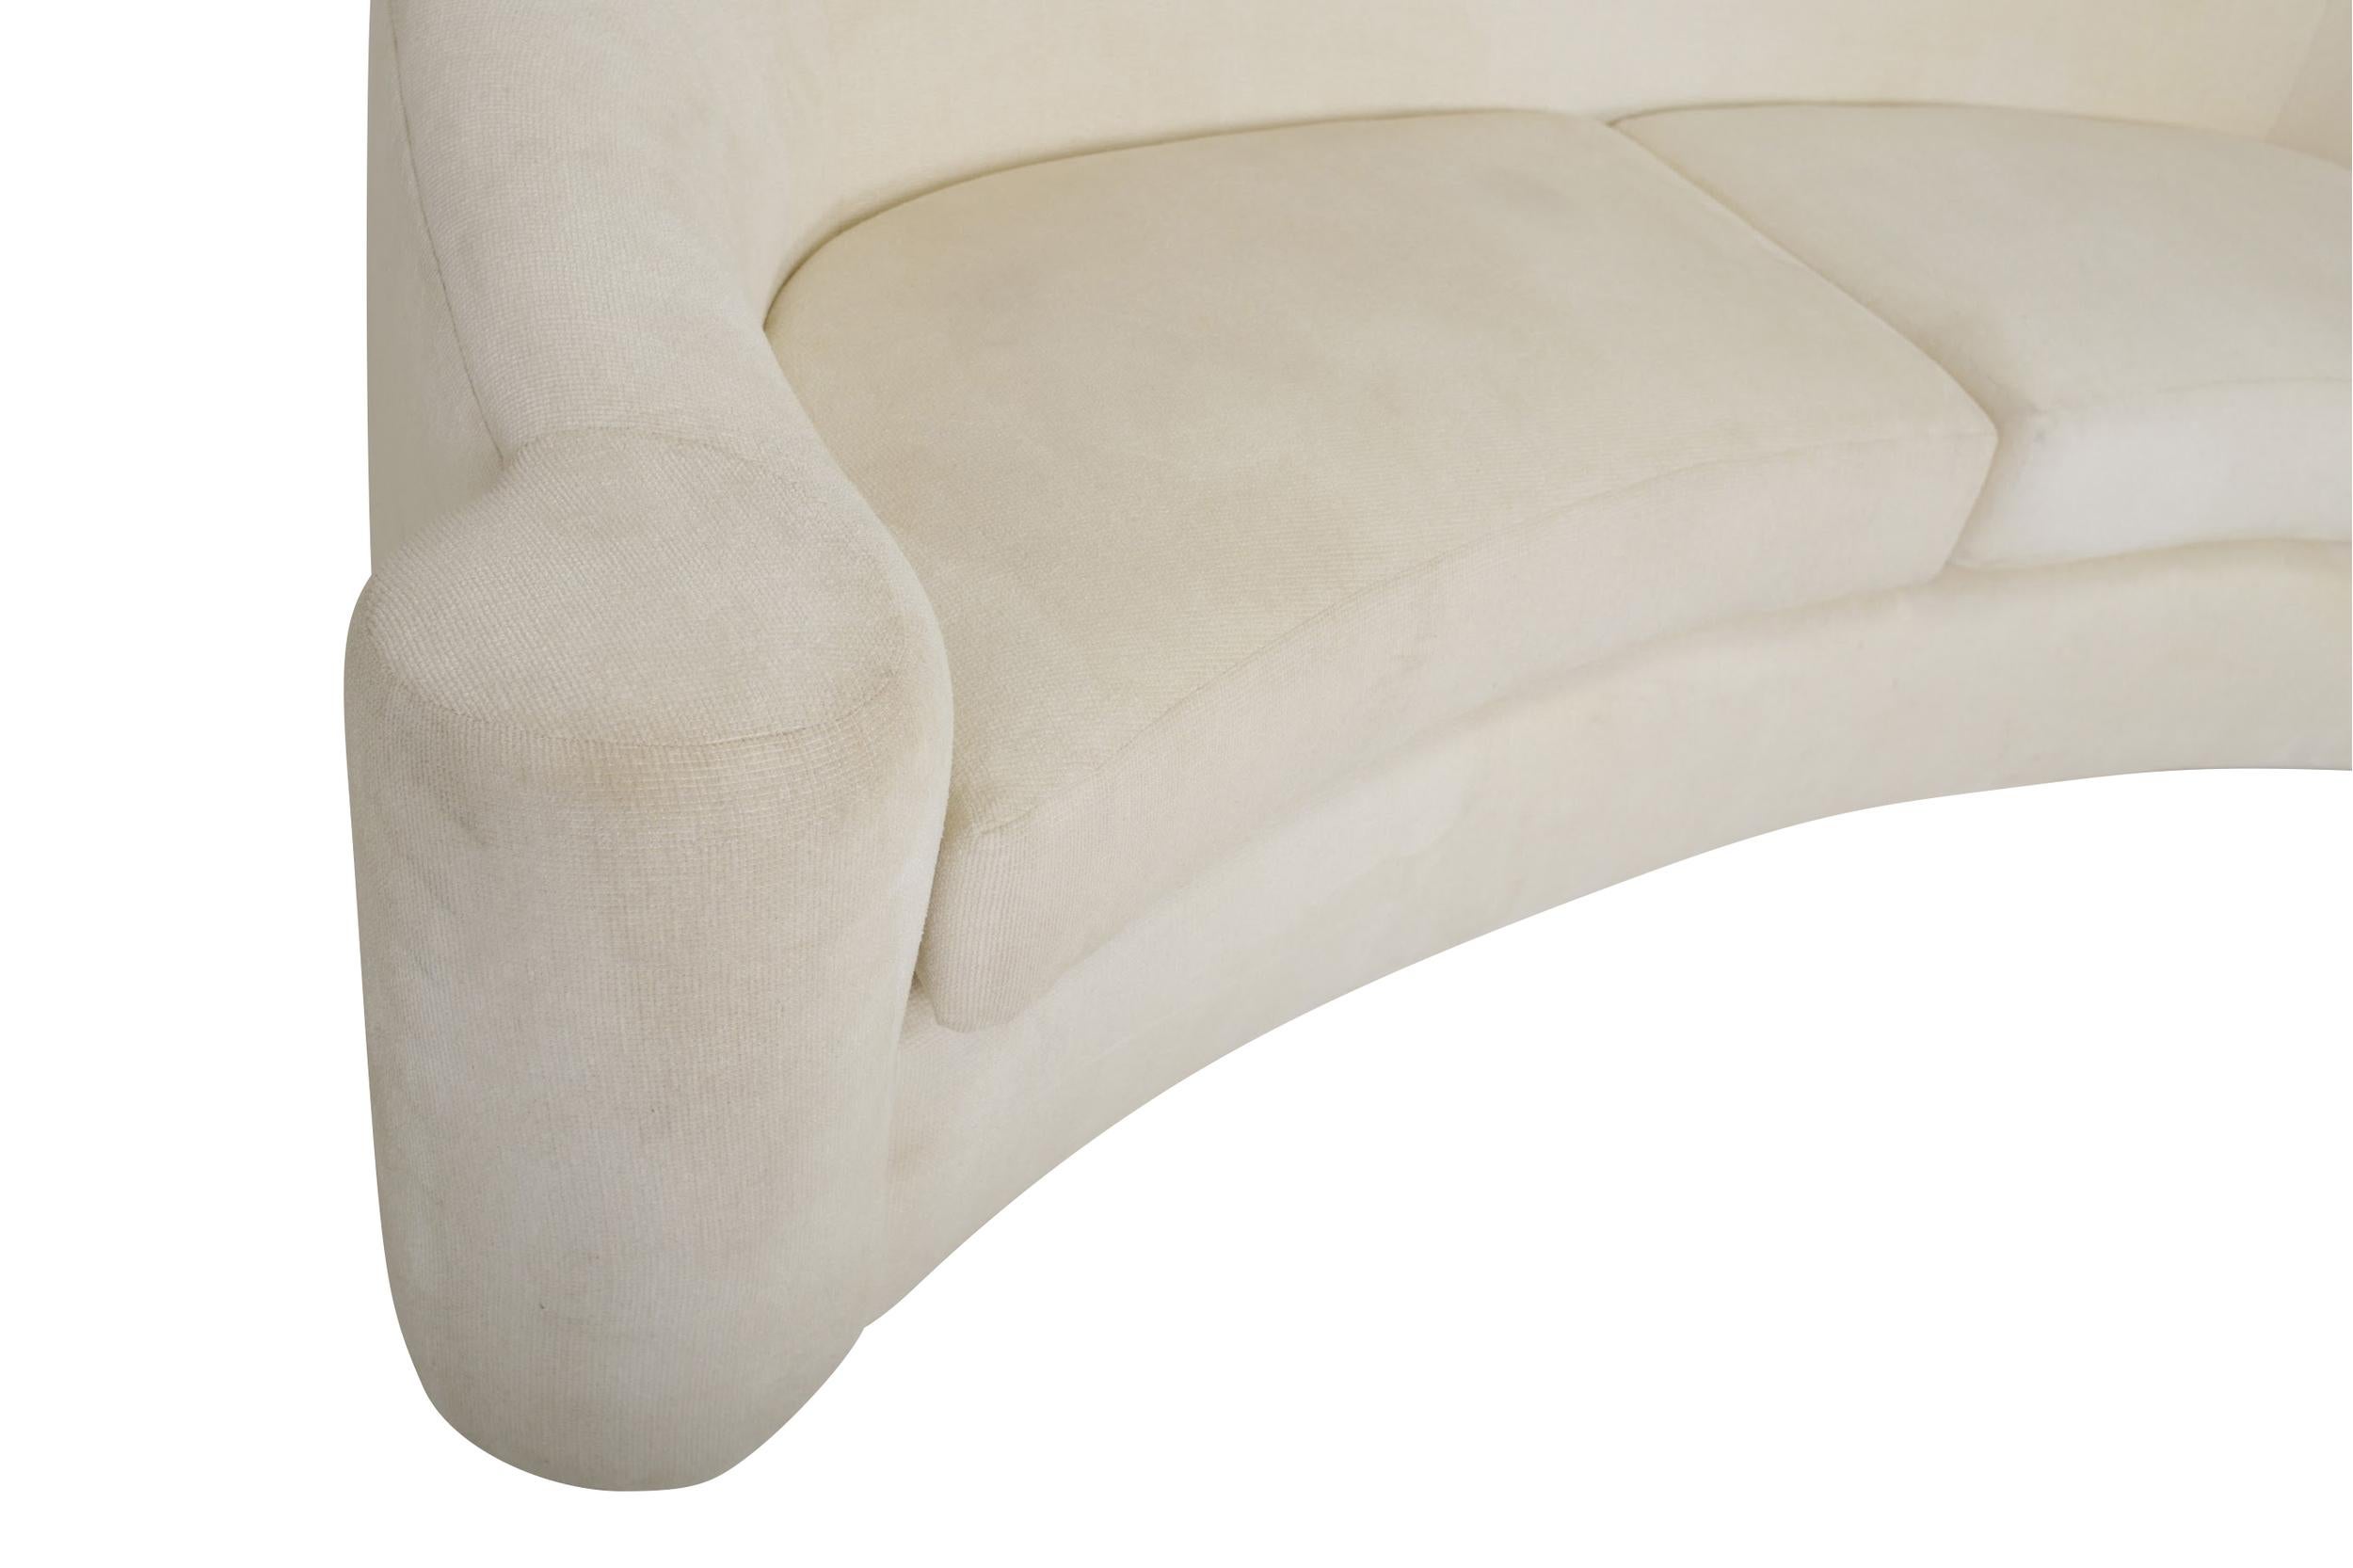 Wide arm sofa designed by Steve Chase for Martin Brattrud in 1994. Original white chenille upholstery shows signs of use.
  